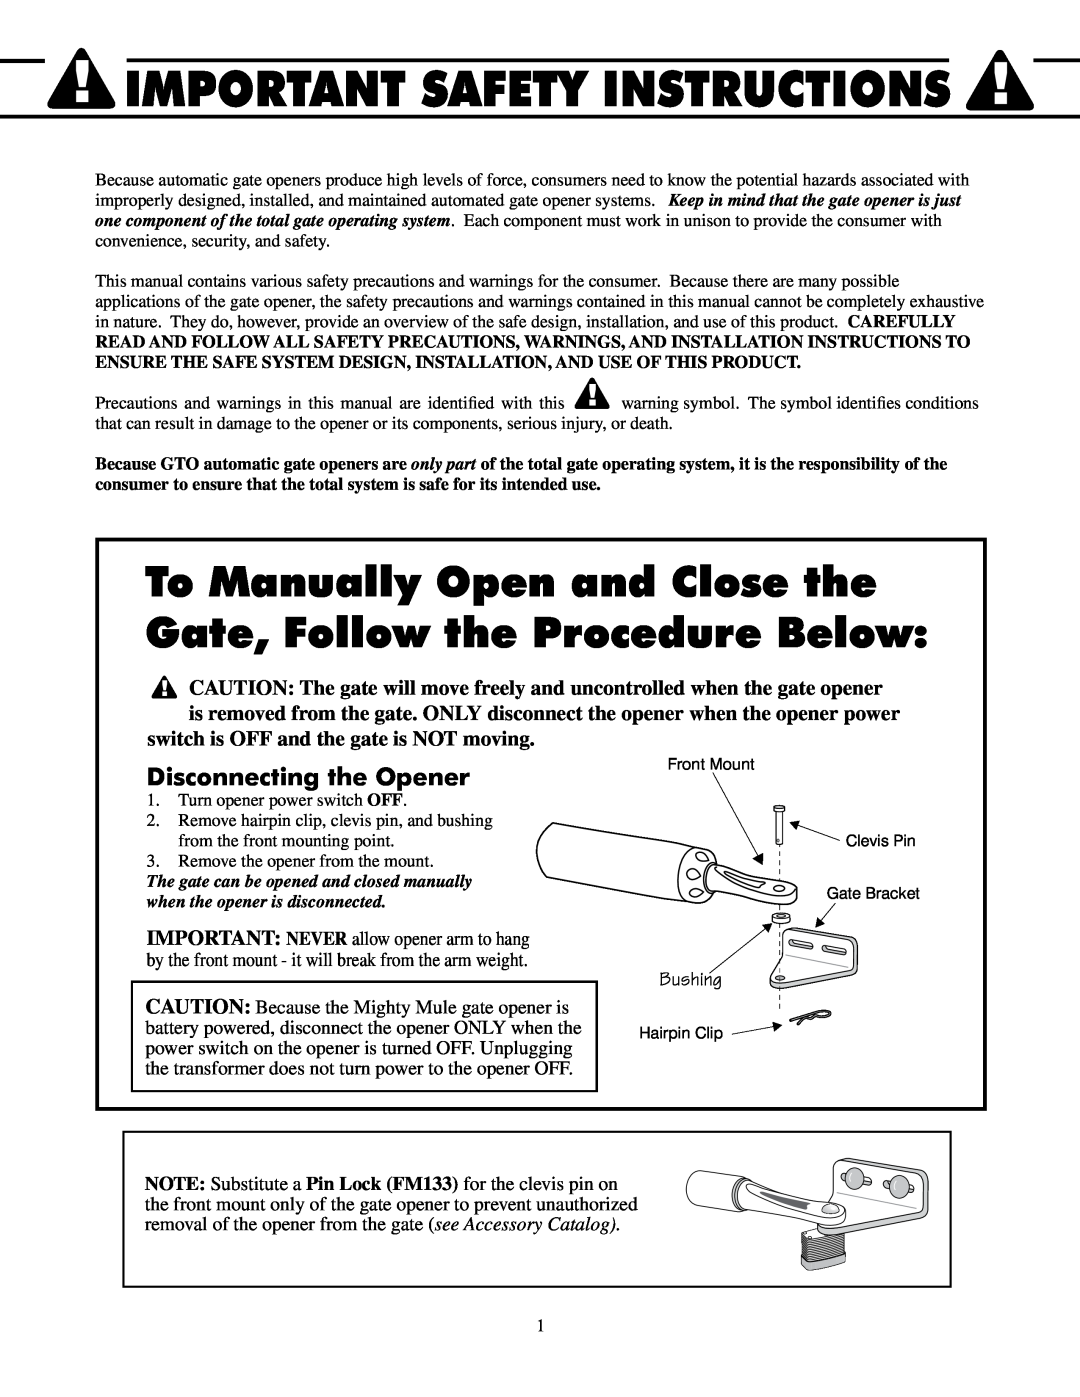 GTO UL325 SERIES Important Safety Instructions, To Manually Open and Close the Gate, Follow the Procedure Below, Bushing 